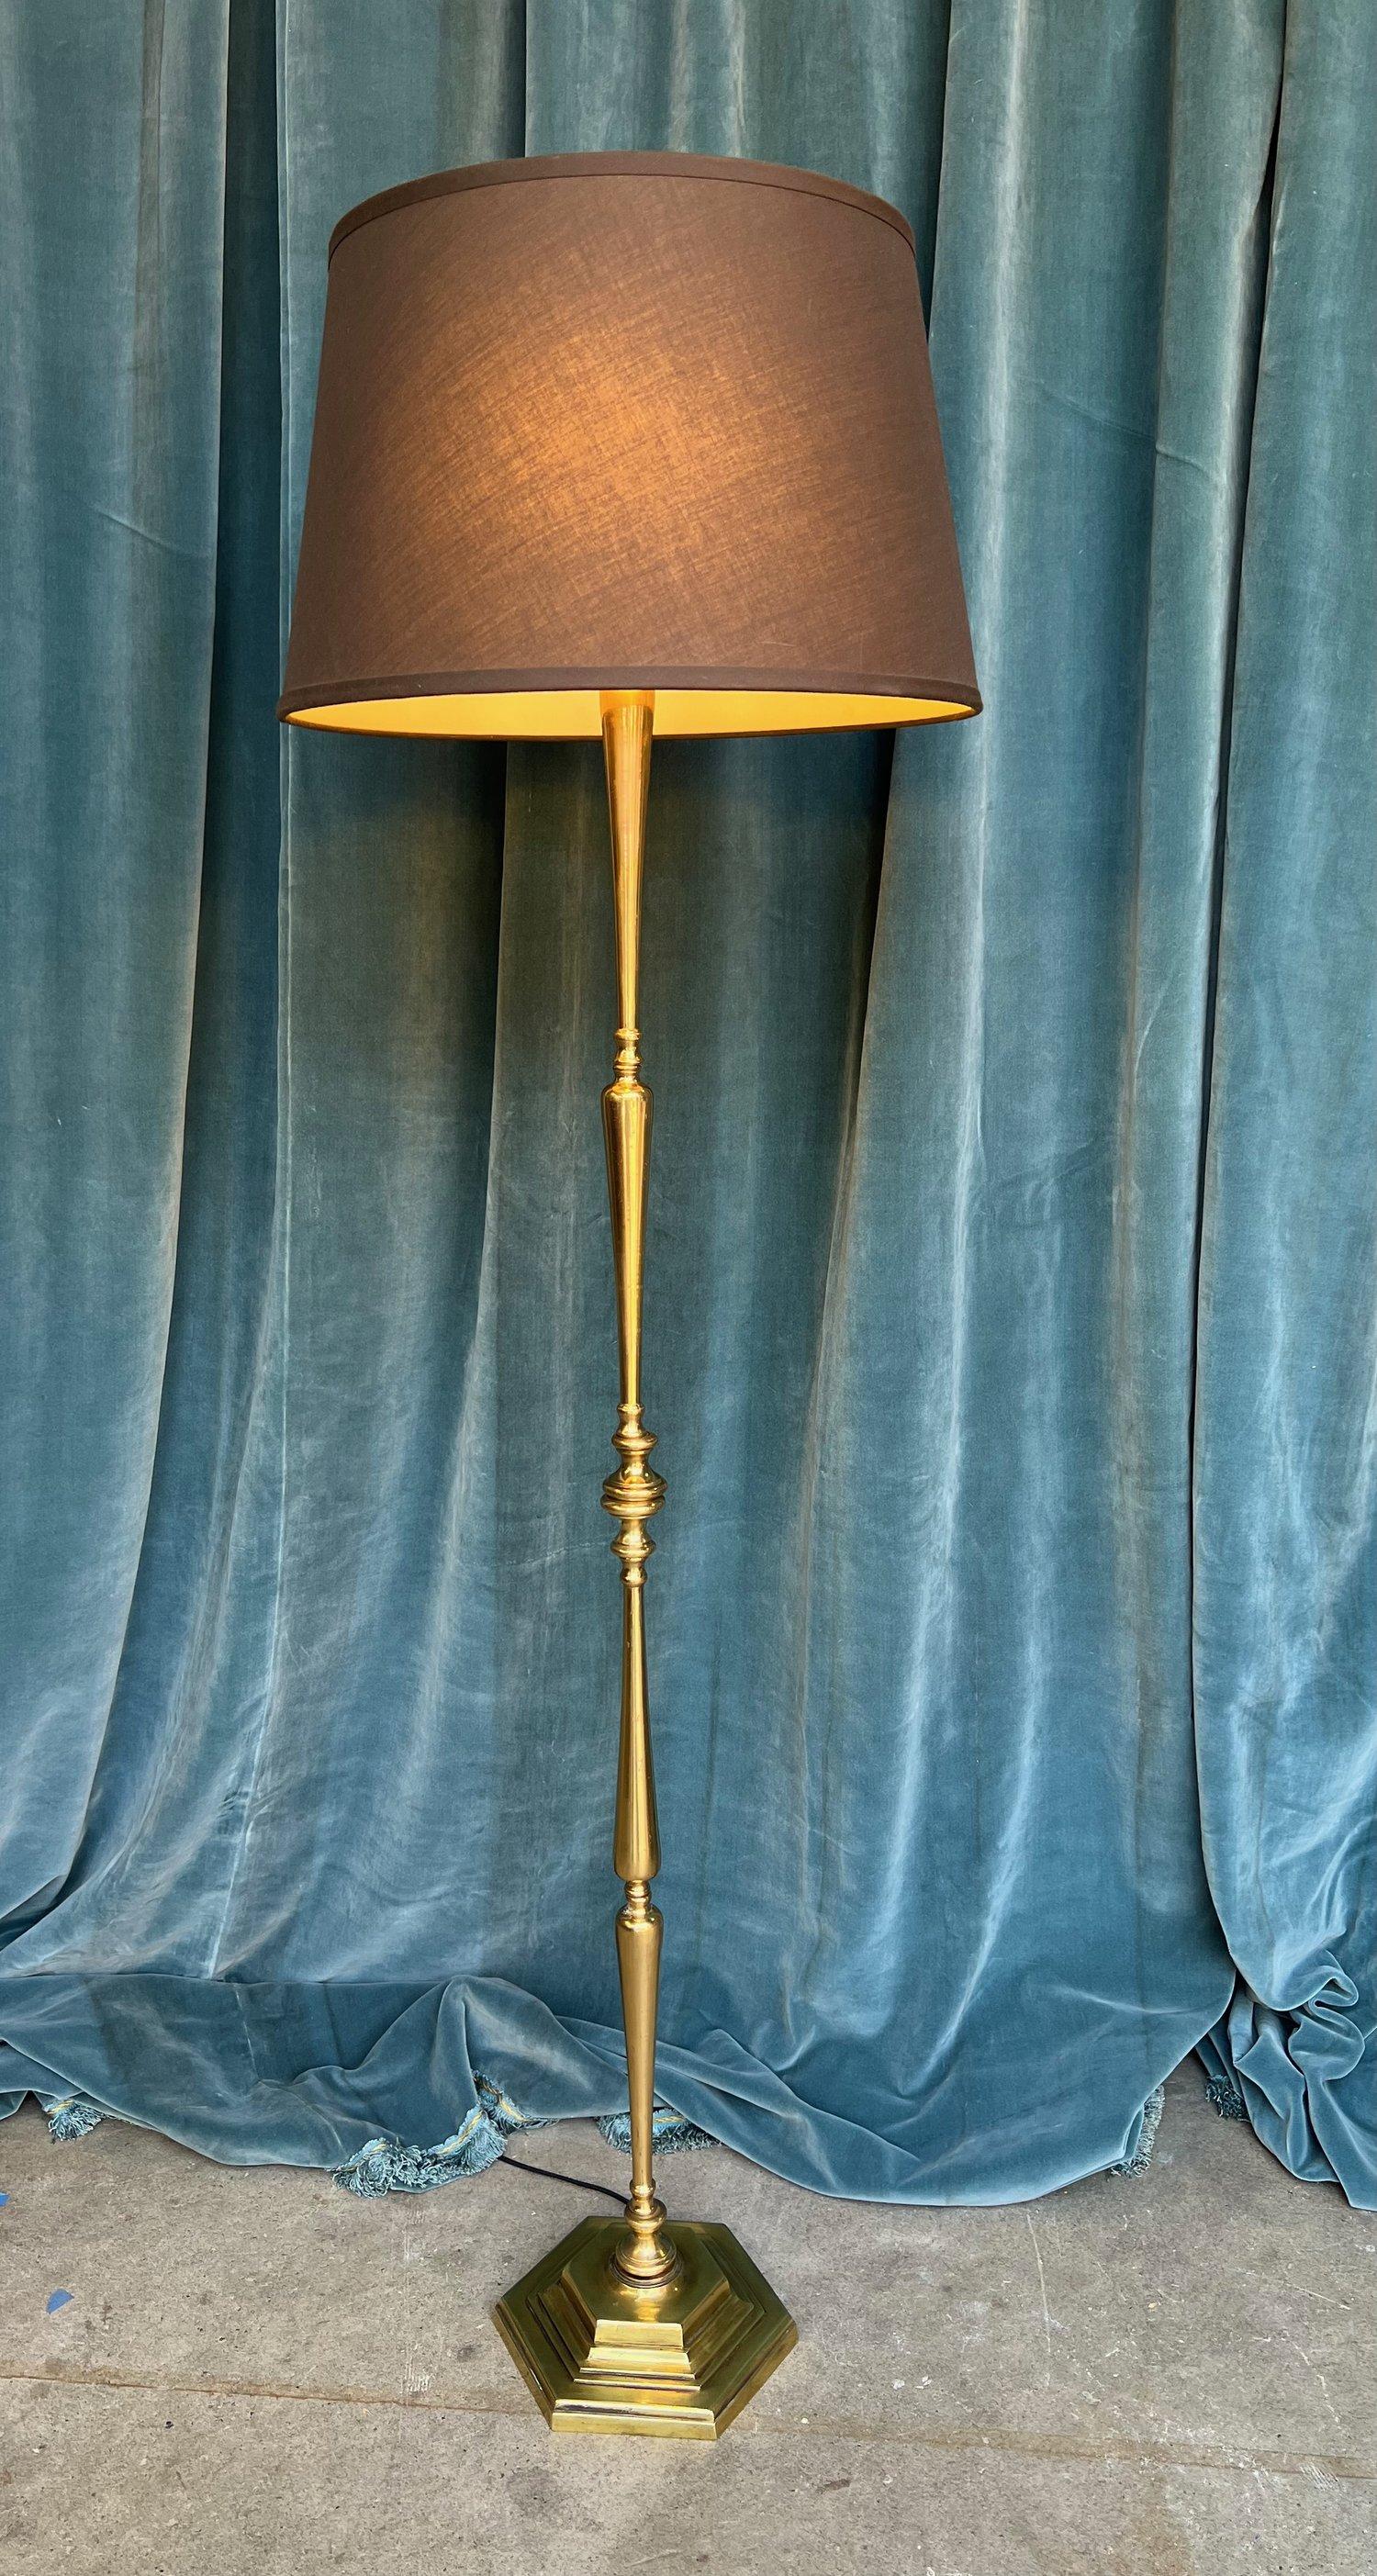 This elegant French floor lamp dates back to the 1940s, built from brass and bronze in a classic design. The lamp stands on a weighted, stepped-up hexagonal base, giving it a stable and sturdy foundation. Turned solid brass components are assembled